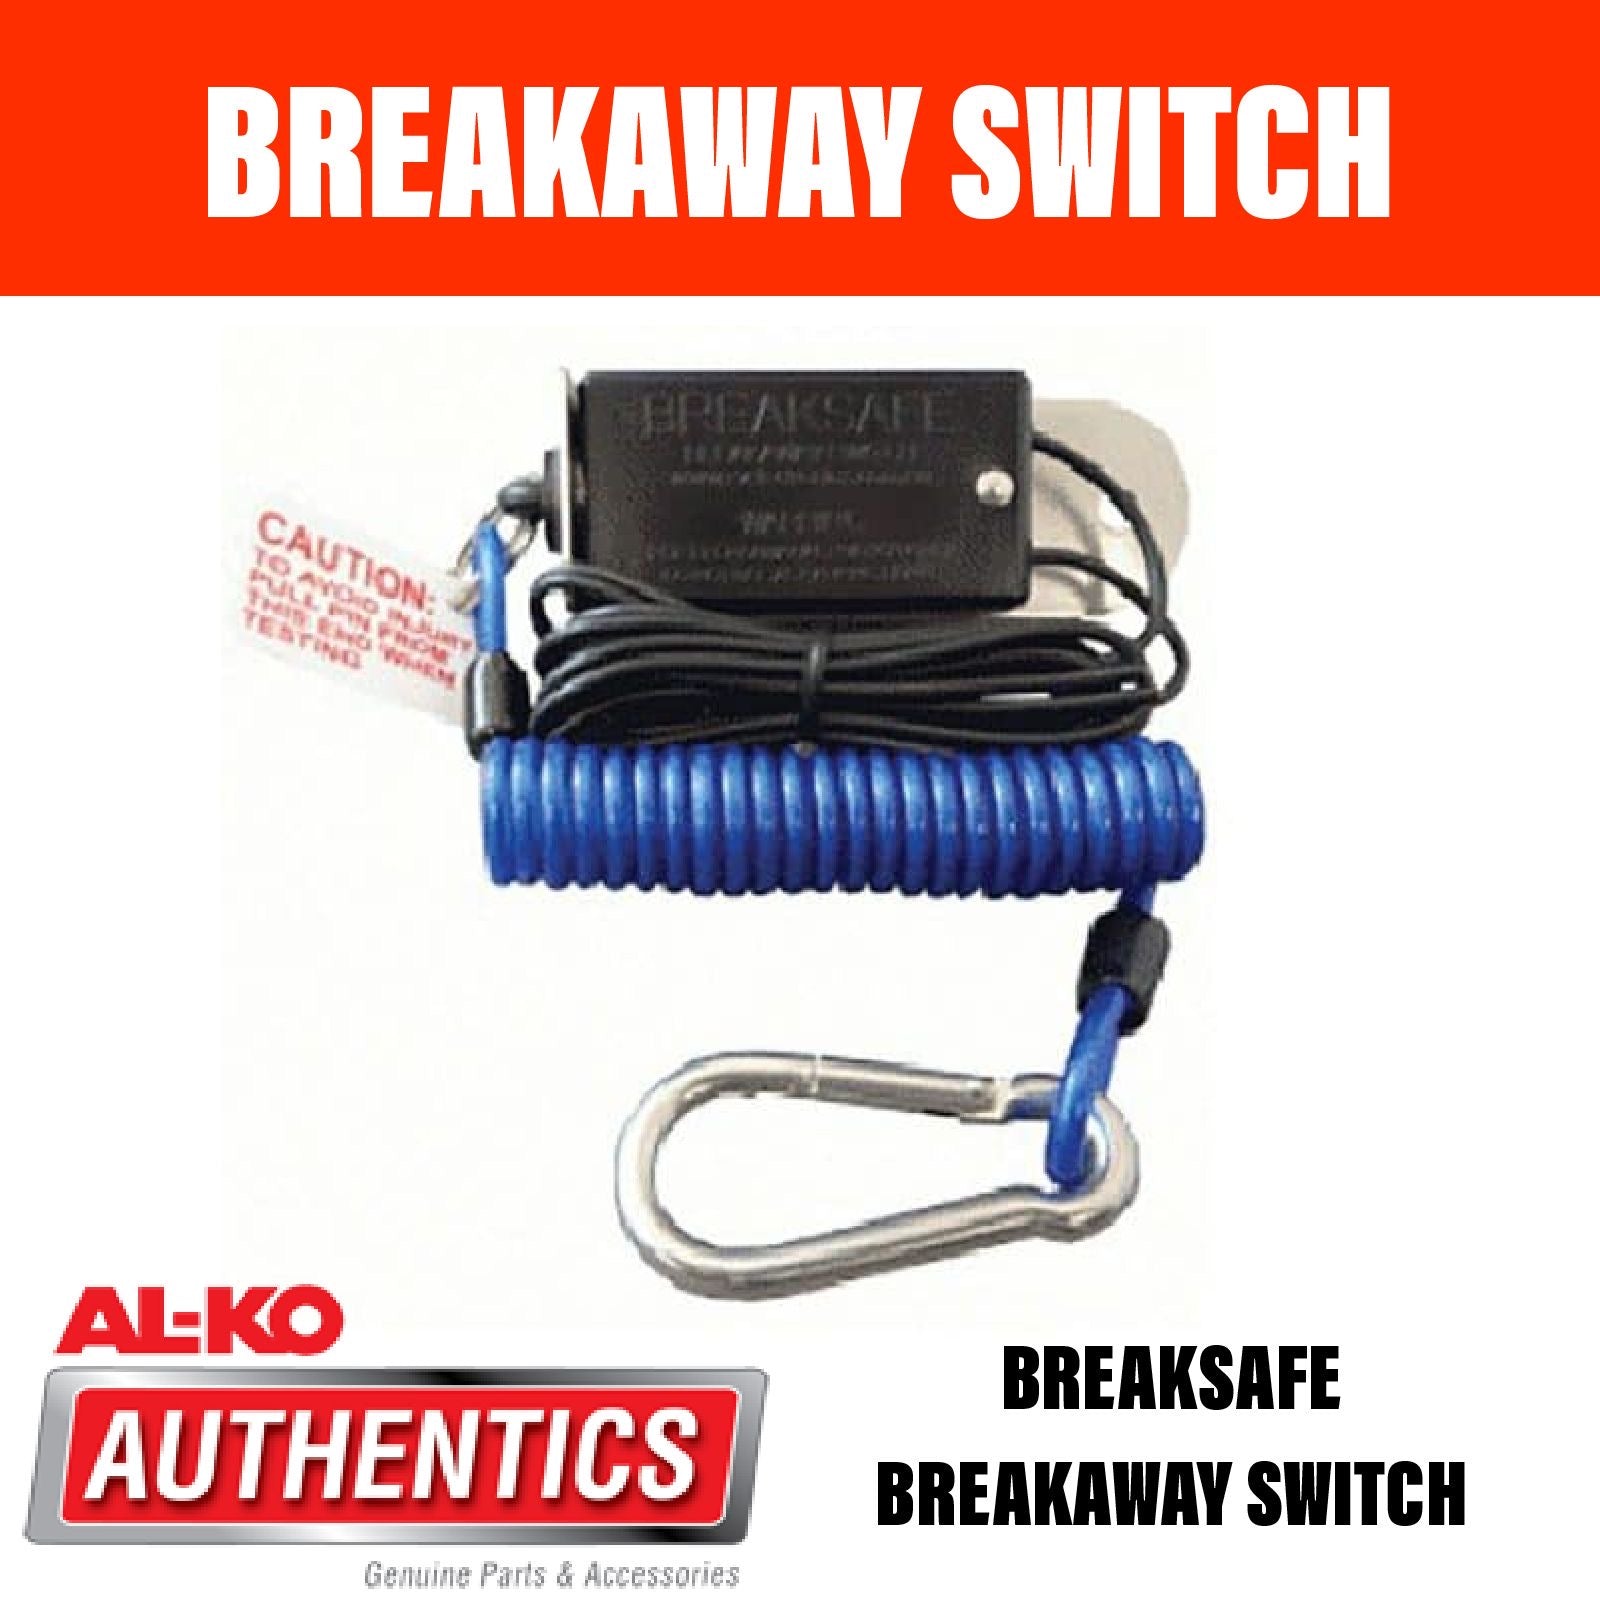 BREAKSAFE BREAKAWAY SWITCH WITH CABLE